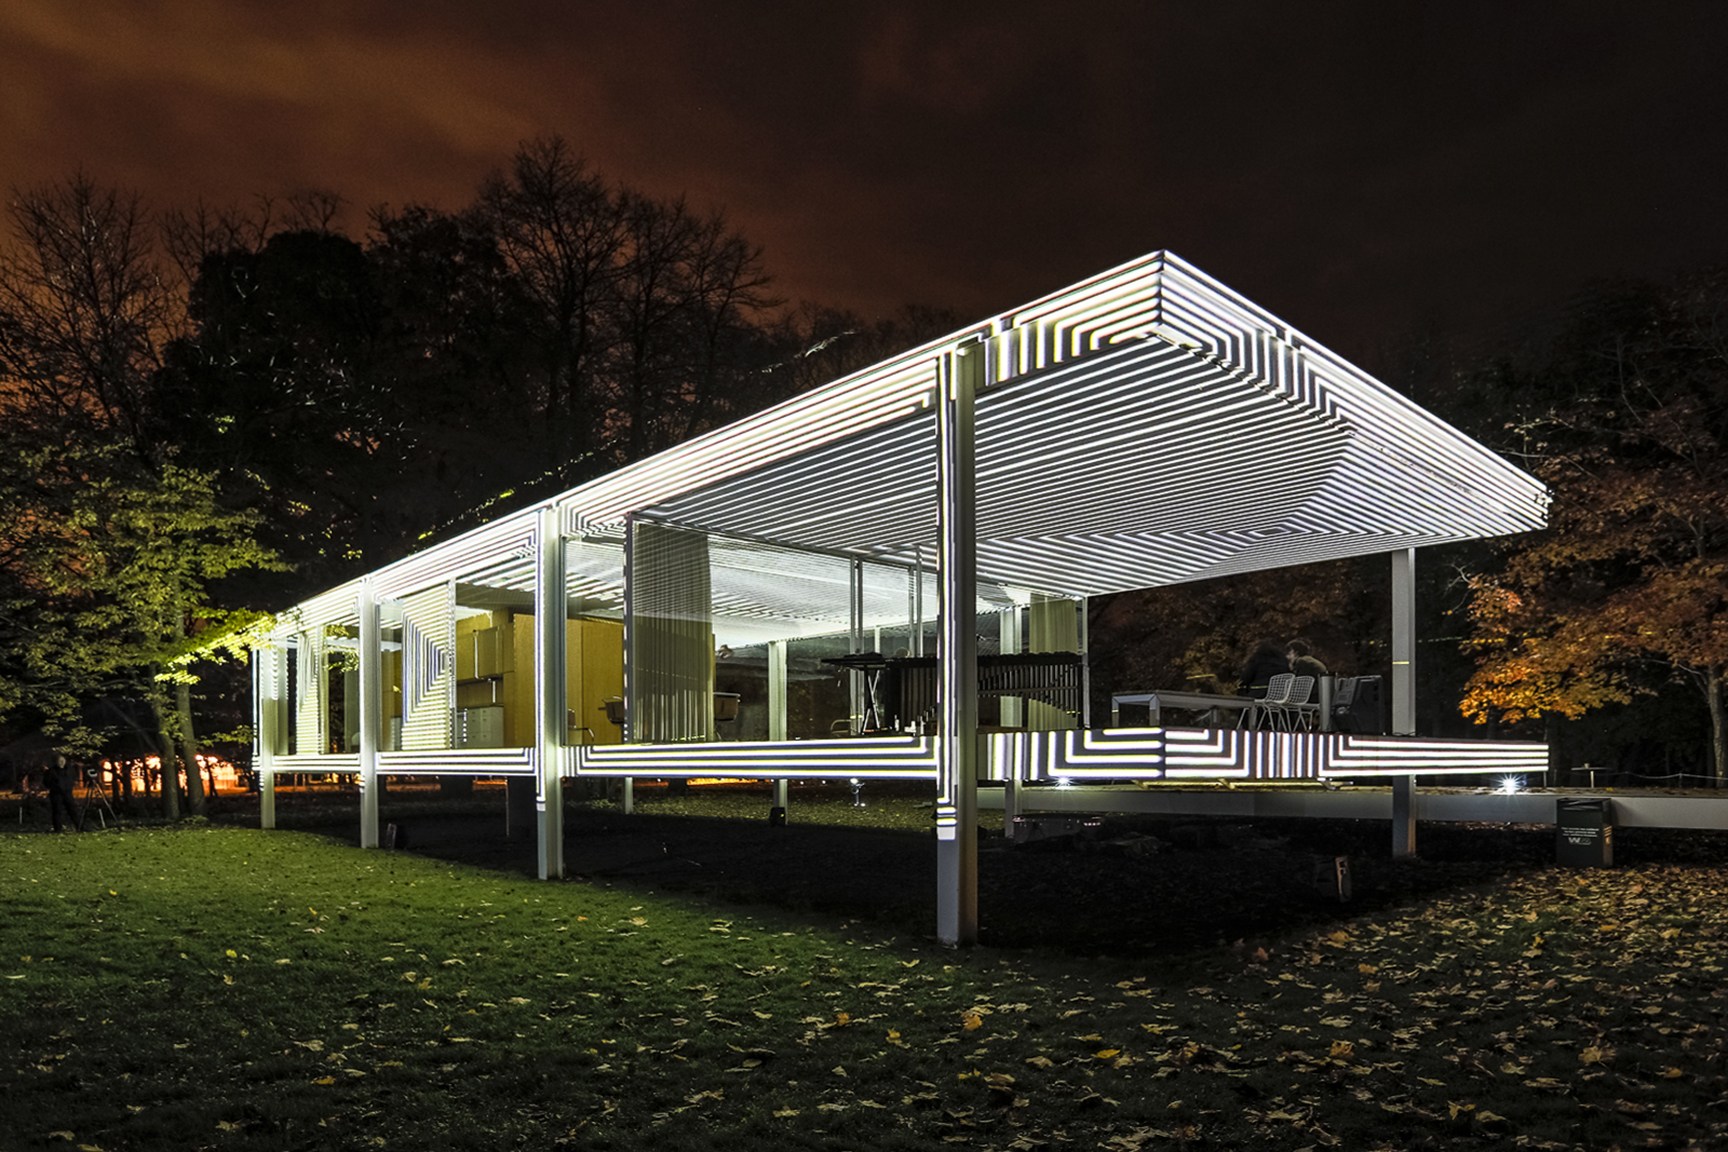 The Farnsworth House projected in black-and-white stripes at night